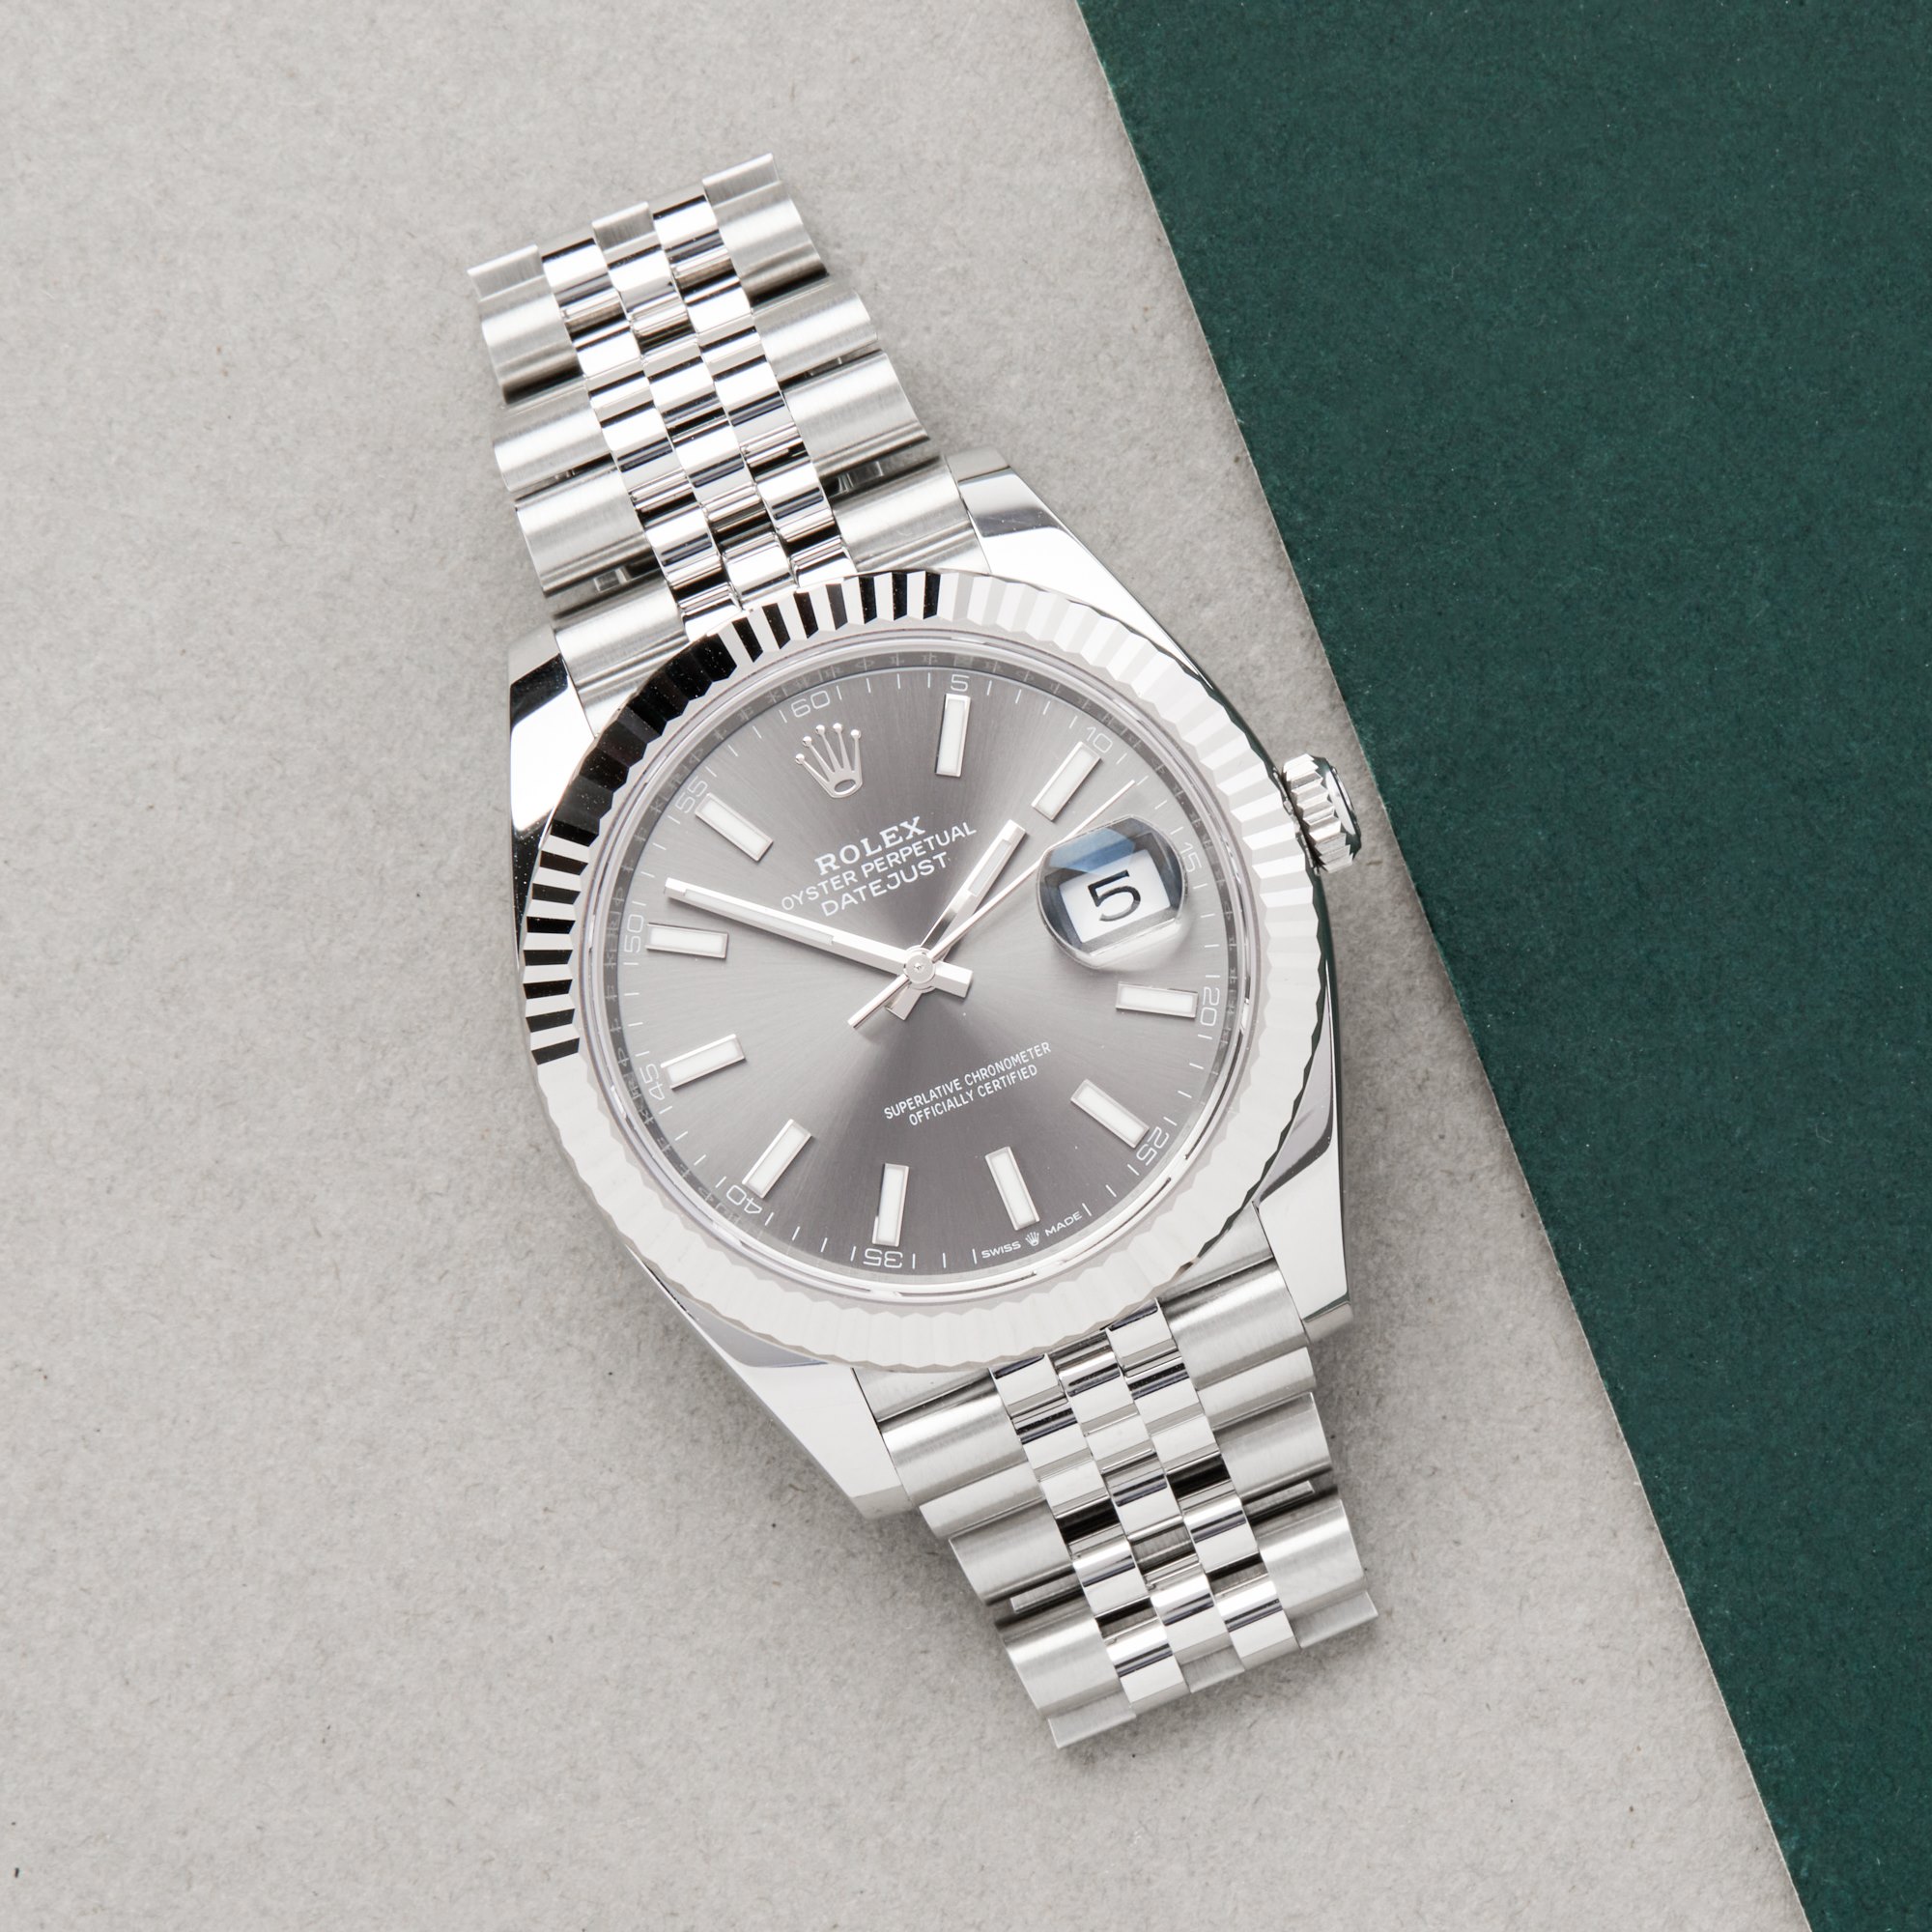 Rolex Datejust 41 White Gold & Stainless Steel 126334